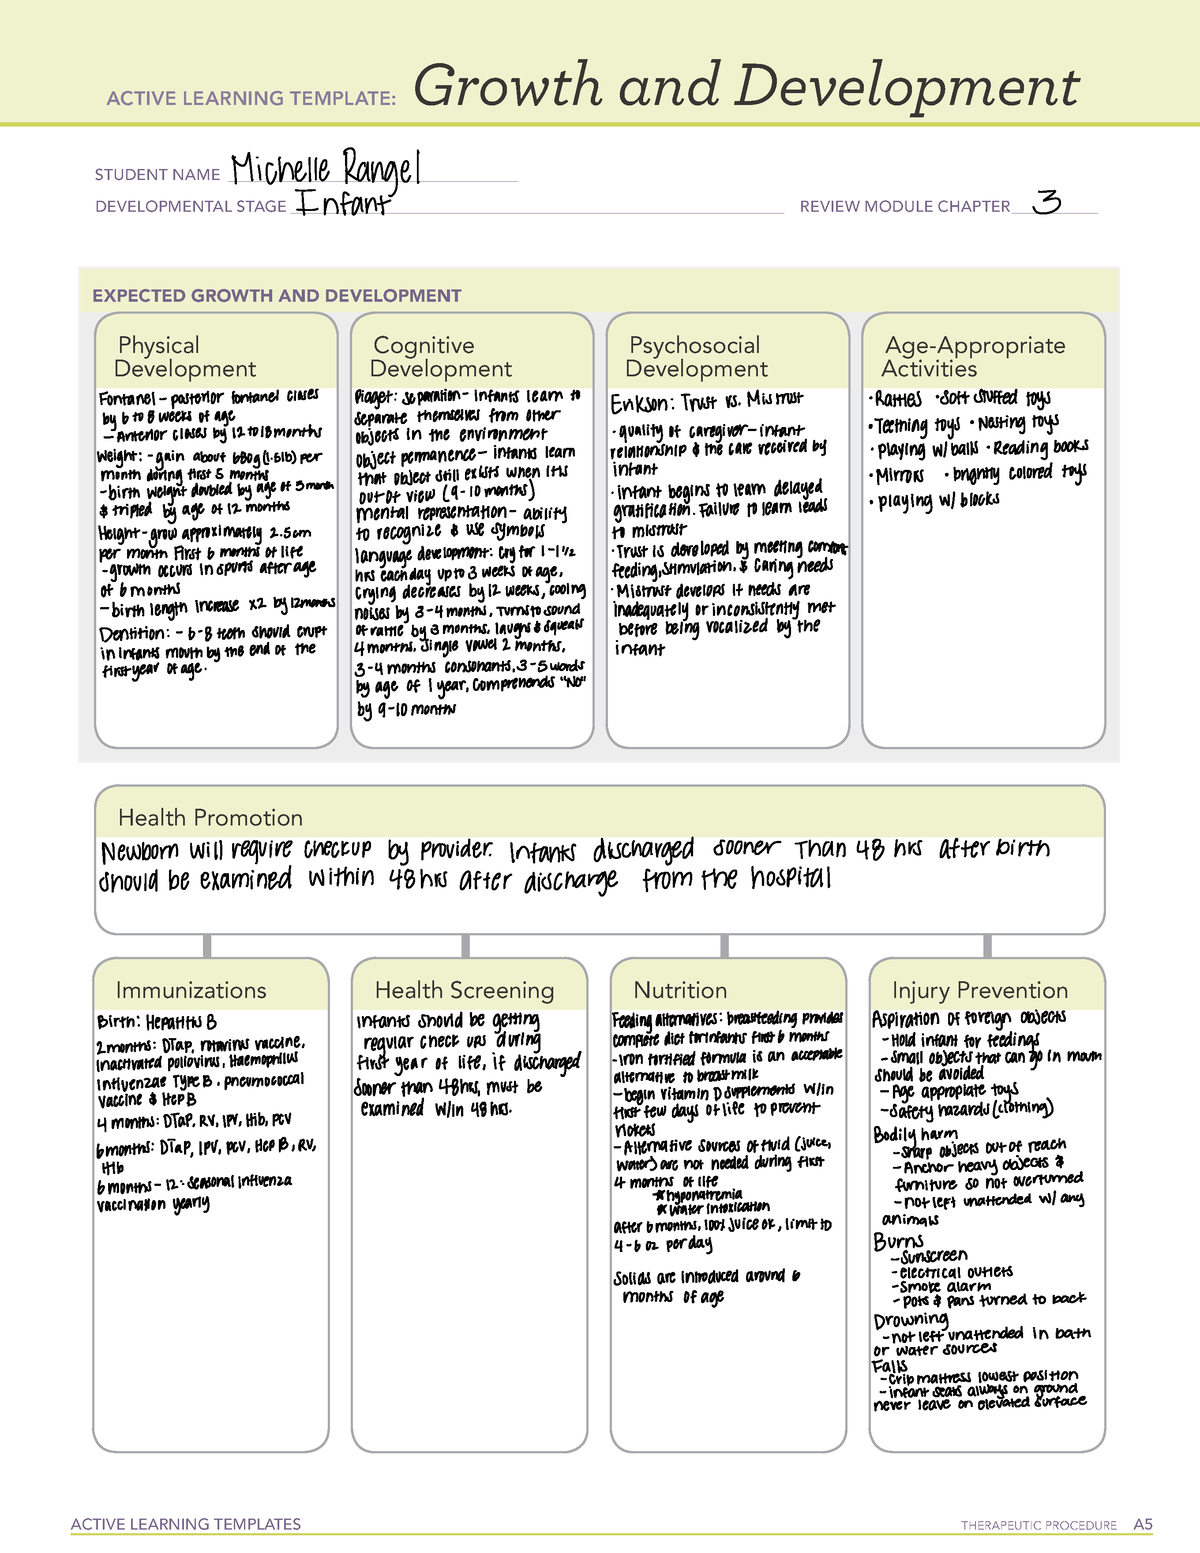 Growth and development infant active learning template ACTIVE